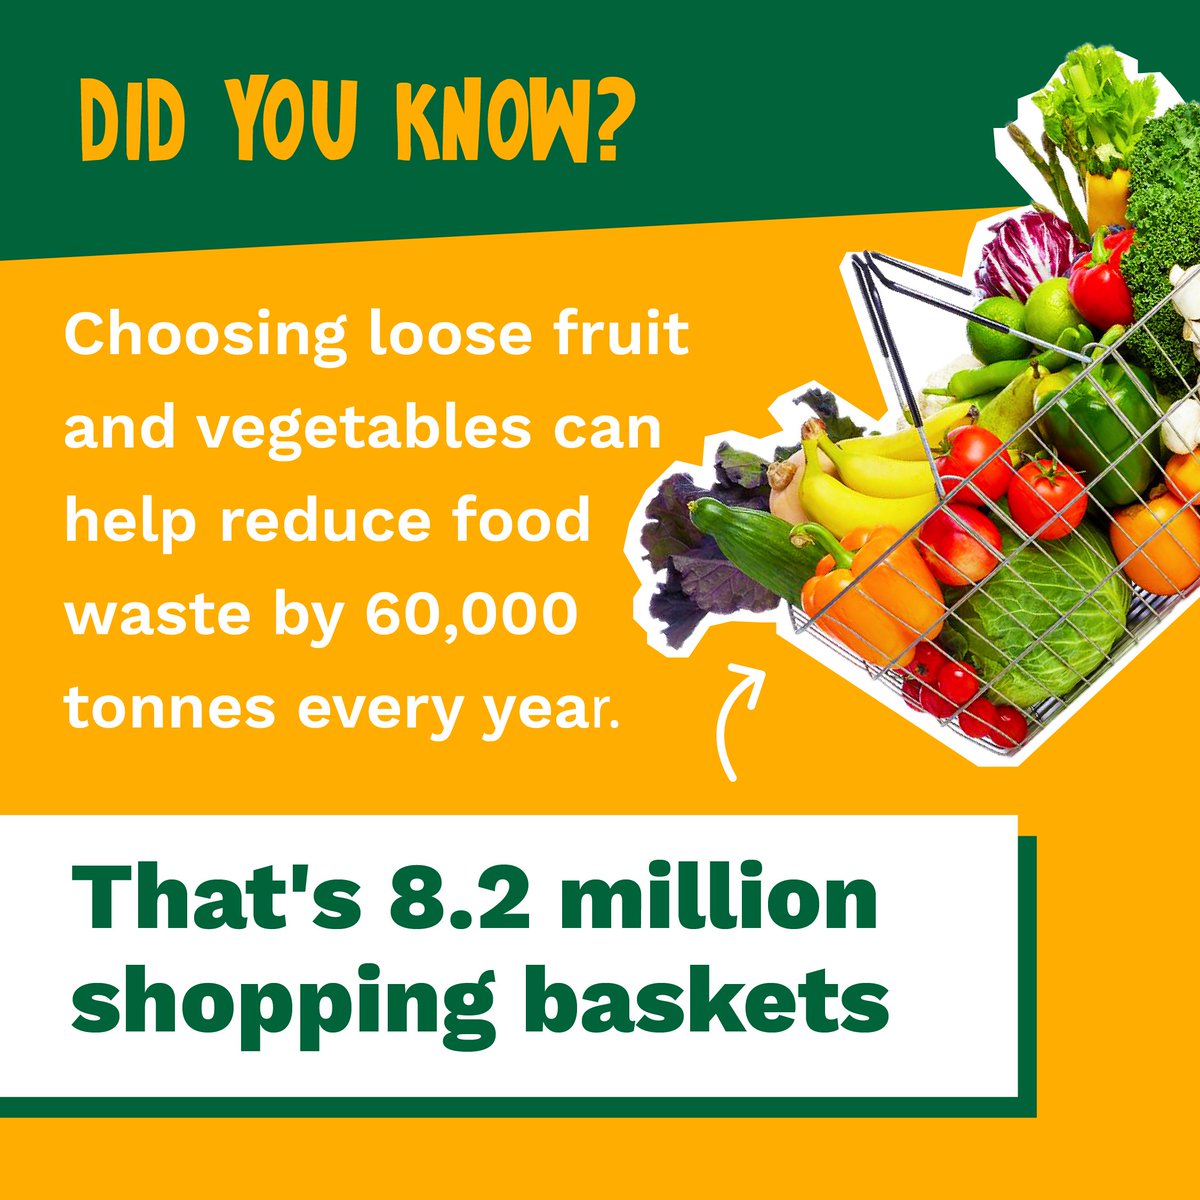 We can all reduce this shocking number by making one small change when shopping - buying loose. Not only will buying fruit and veg loose reduce food waste, it also gives us the opportunity to choose exactly what we want. Watch the full campaign video here: bit.ly/FWAW_24